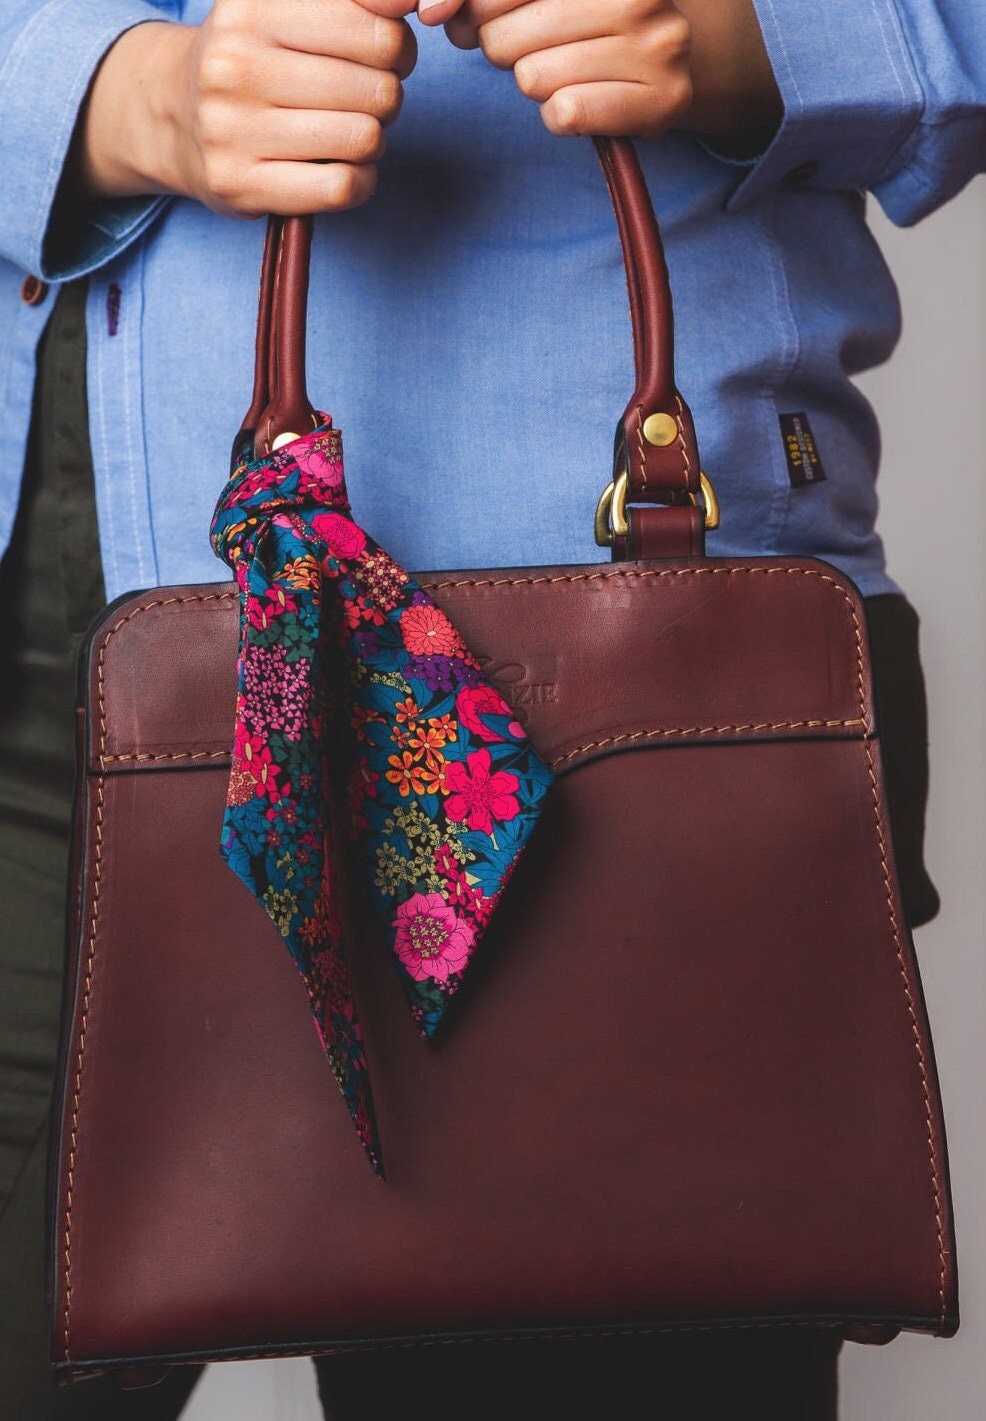 The Loully Skinni Mini Scarf made with Liberty Fabrics - Additional Print Selection